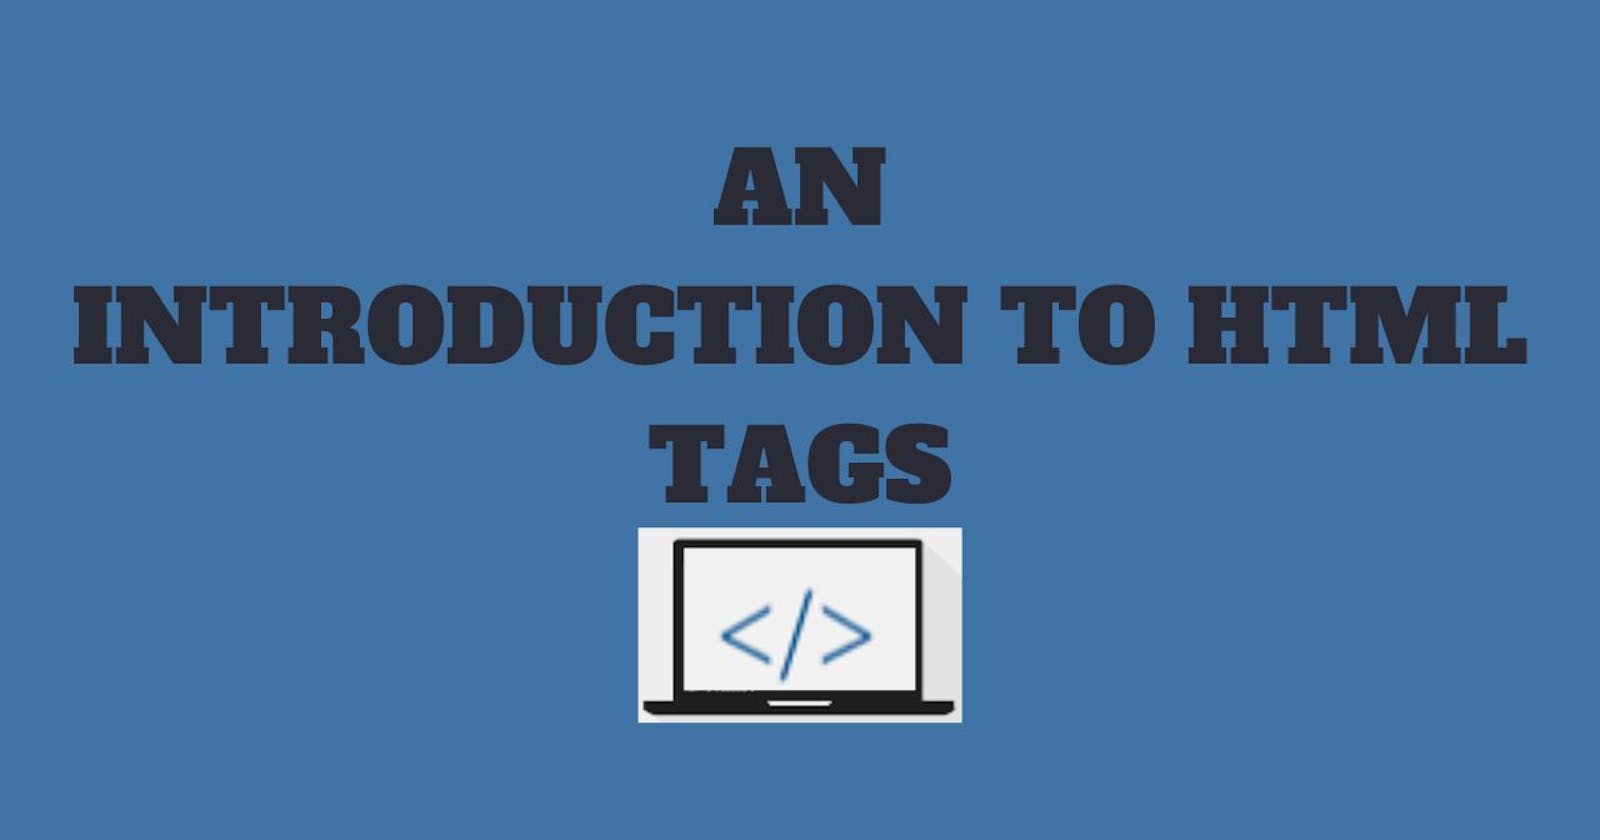 An Introduction to HTML Tags